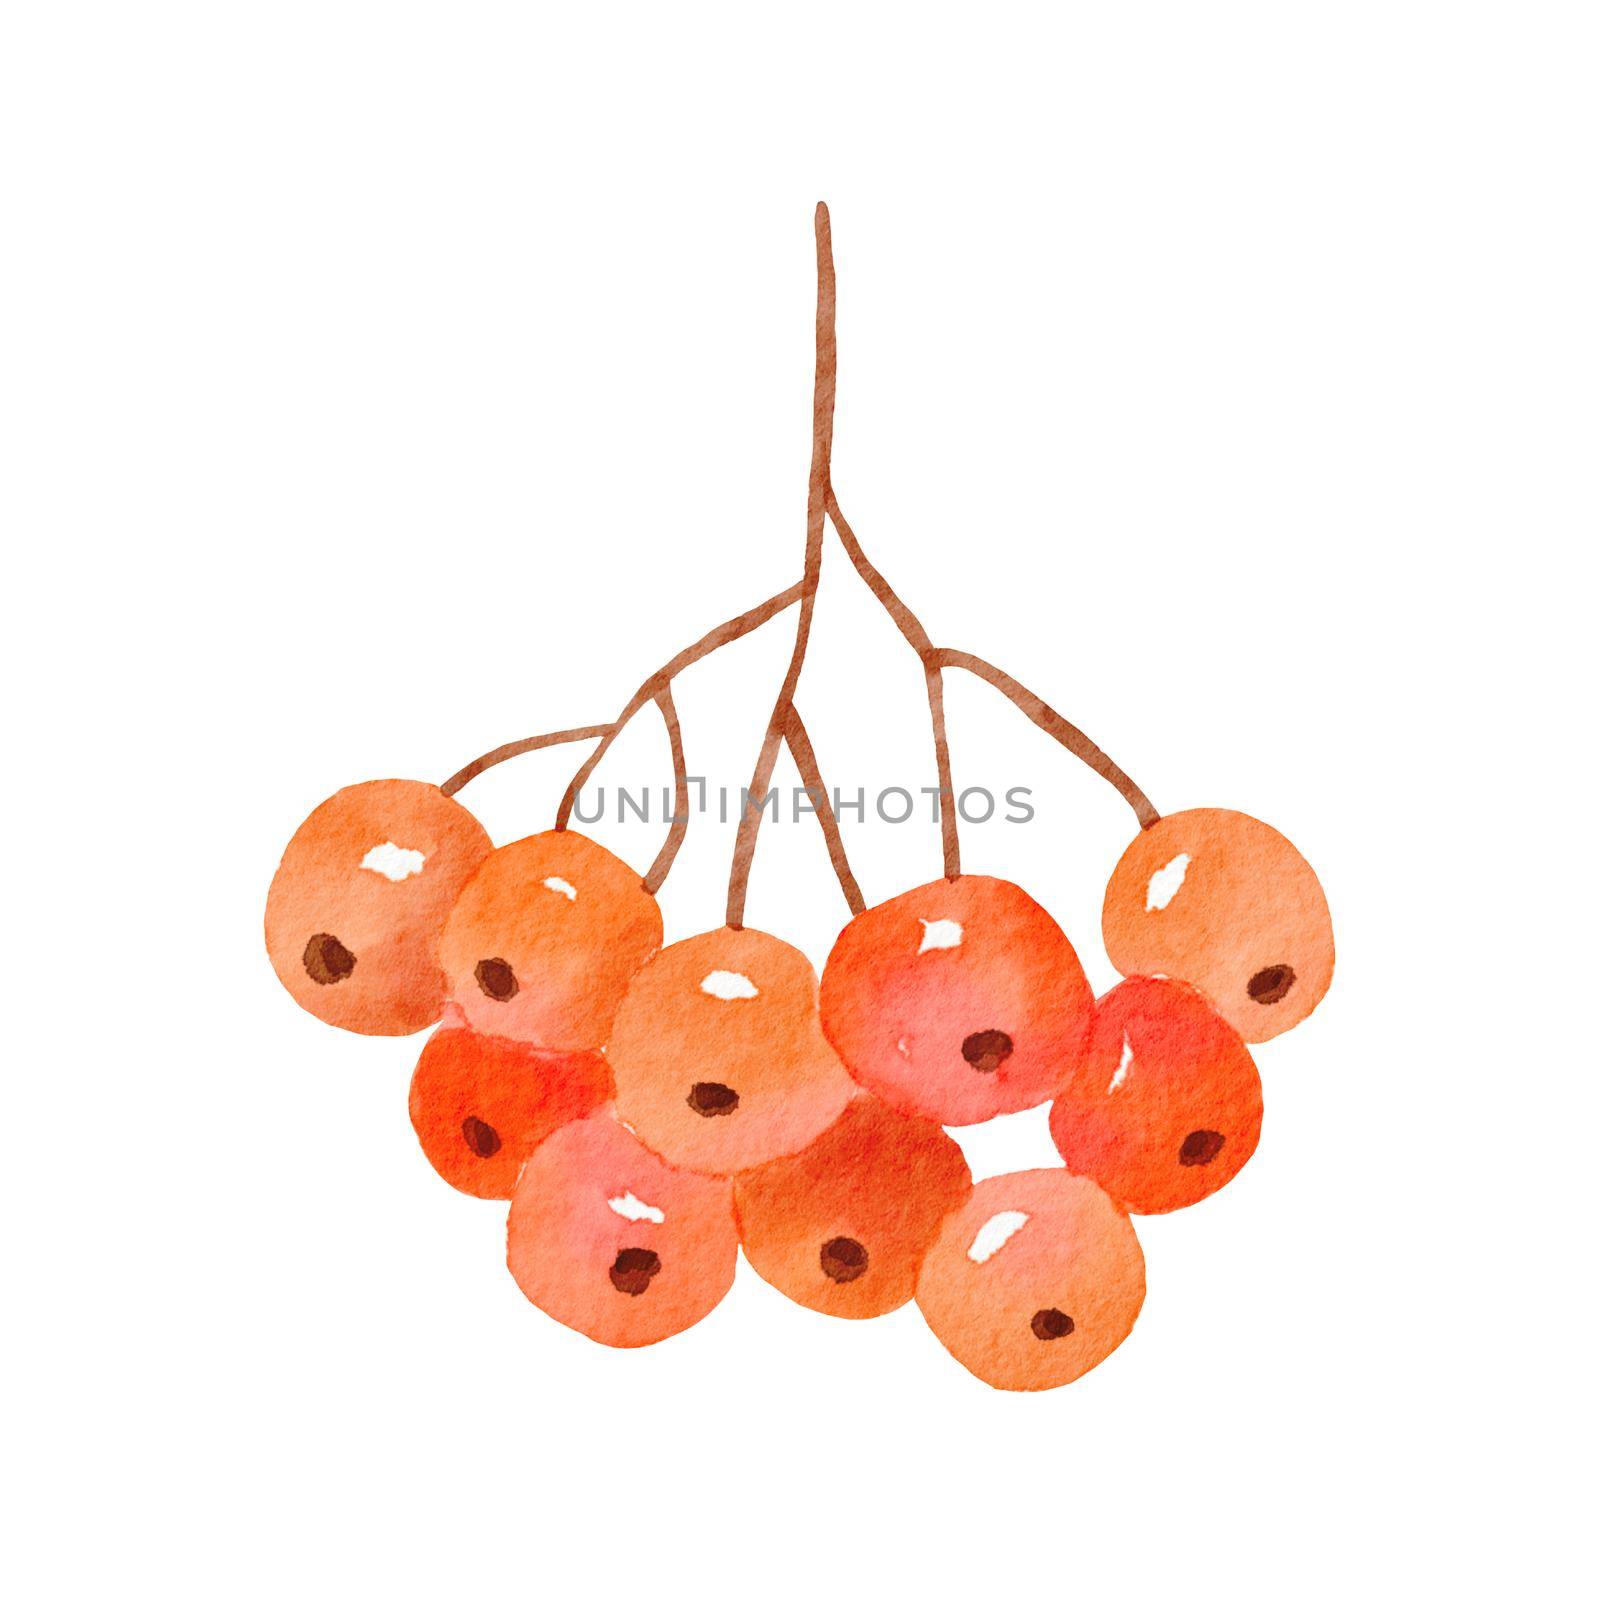 Watercolor illustration of rowan. Bright red branch with berries. Hand drawn fall plant isolated on white